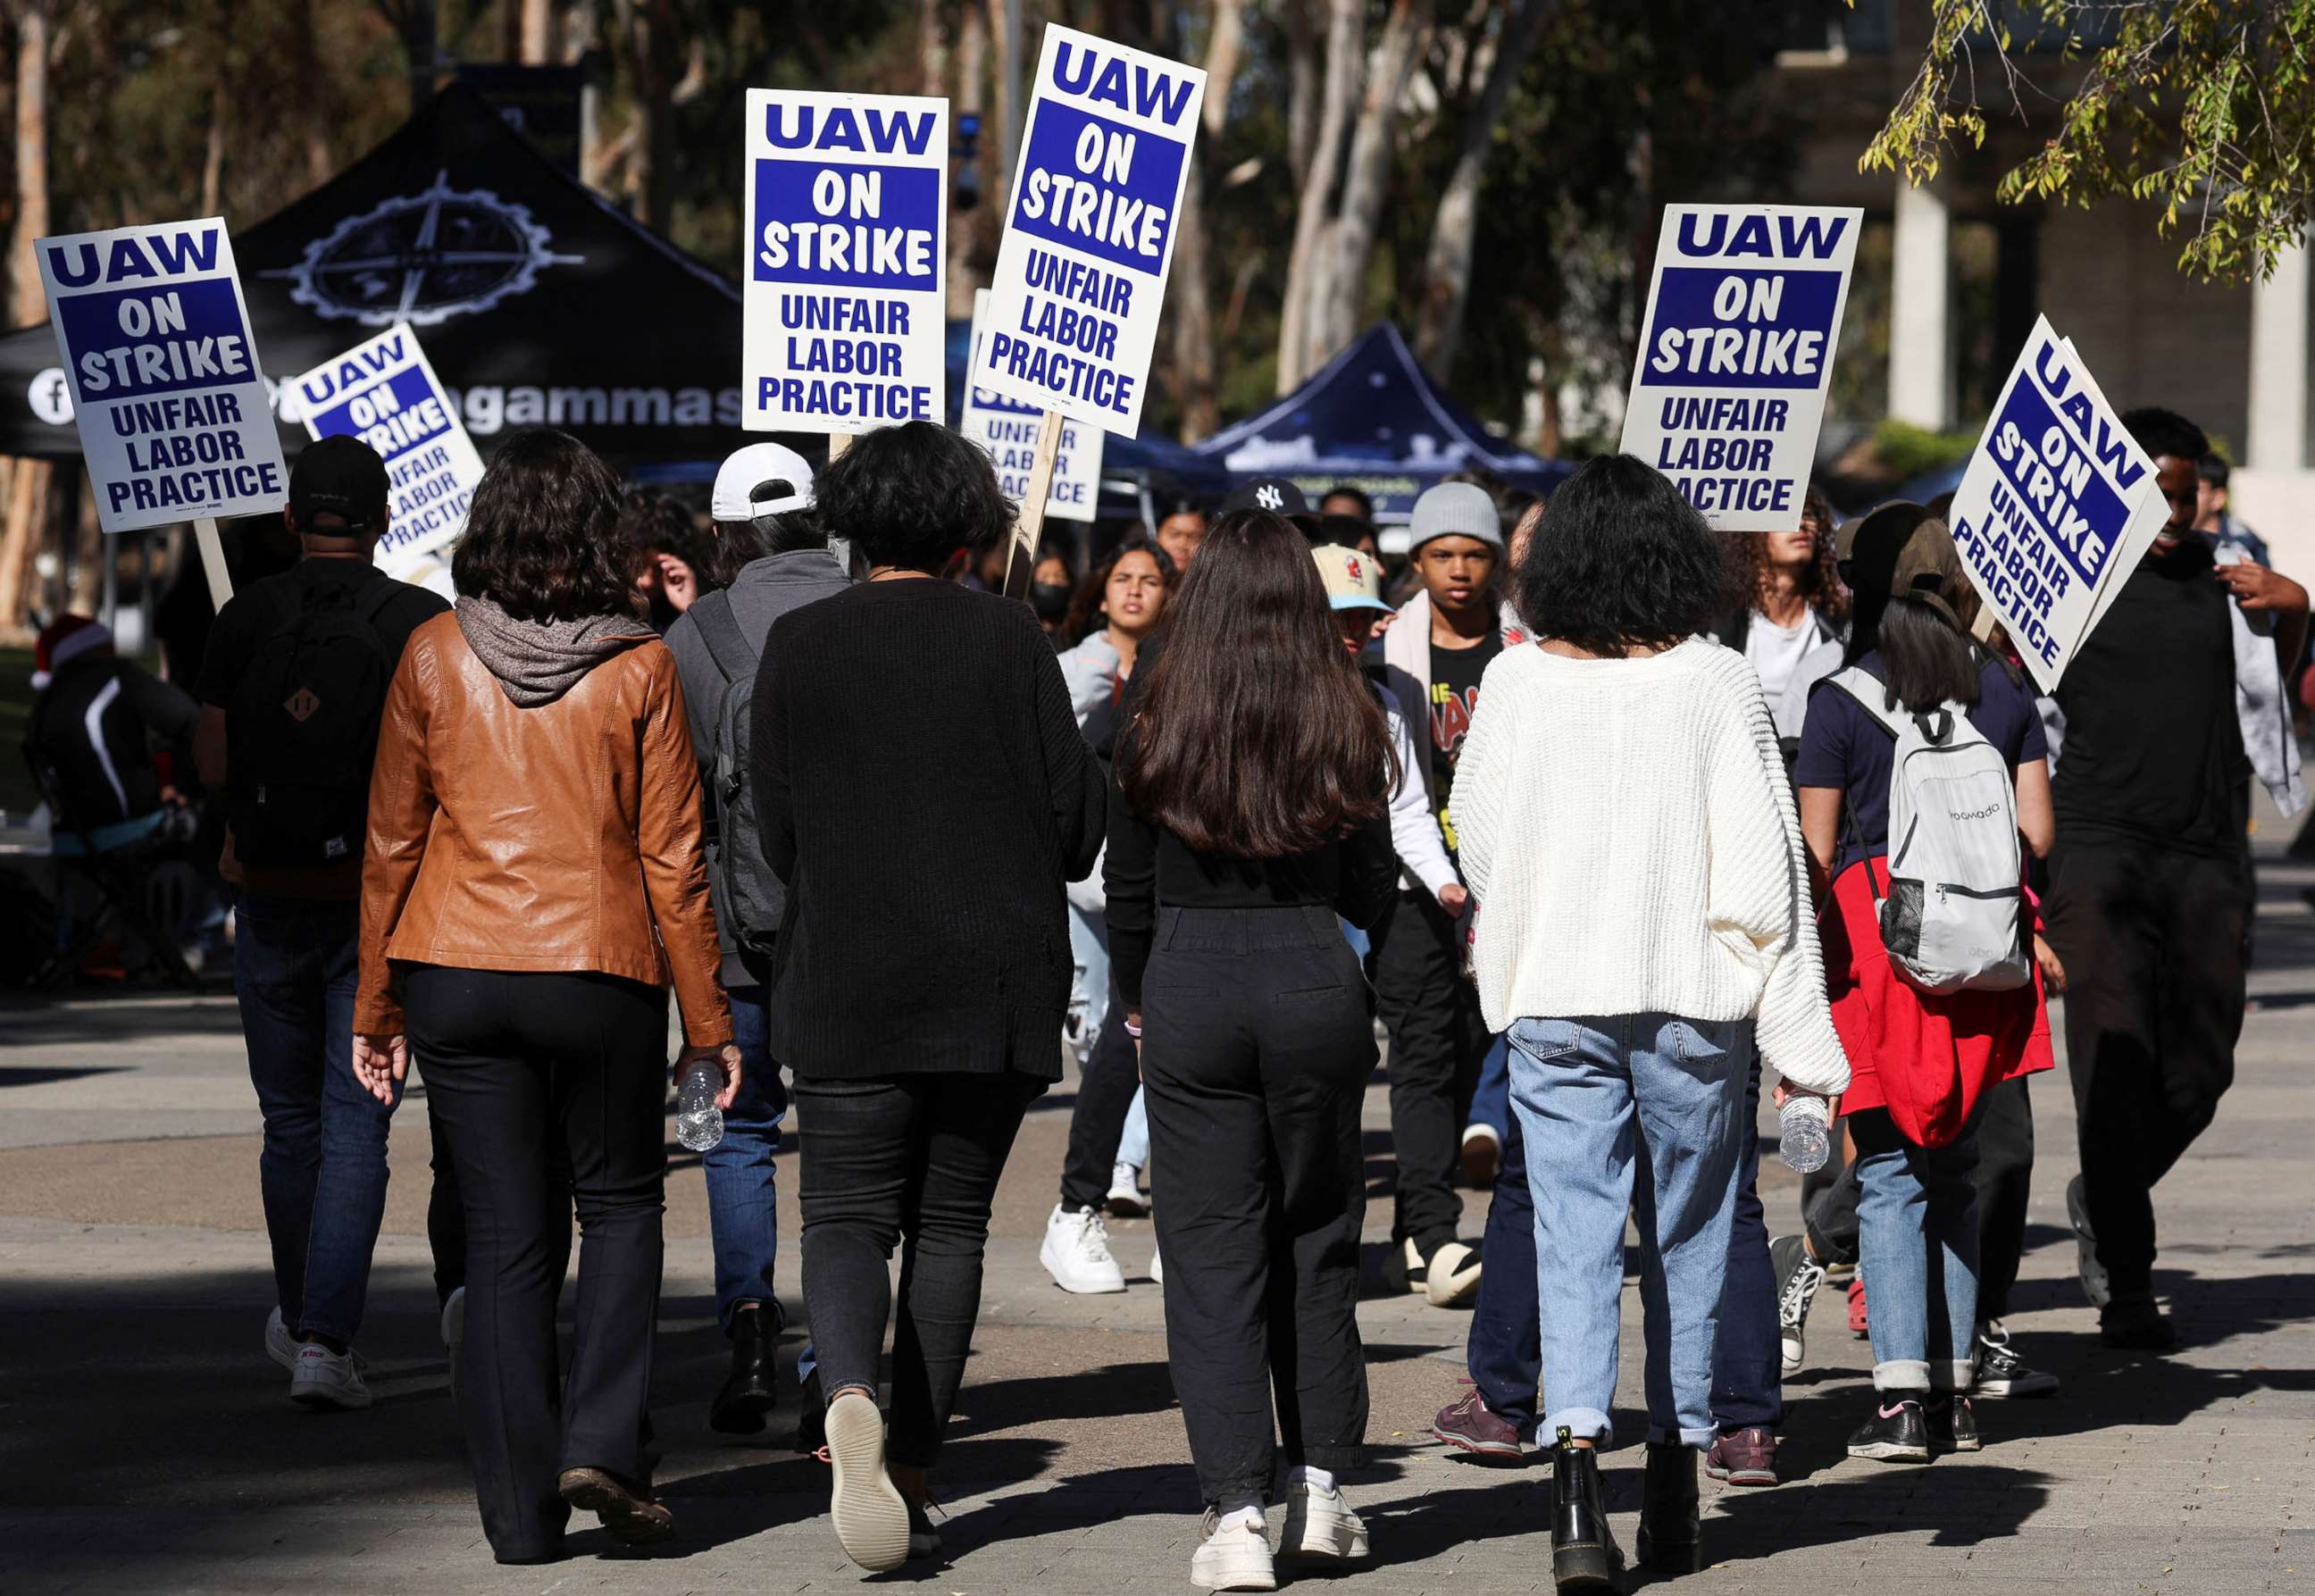 PHOTO: Academic workers at UC San Diego walk out as thousands of employees at the University of California campuses have gone on strike in an effort to secure improved pay and working conditions, Nov. 14, 2022 in San Diego.